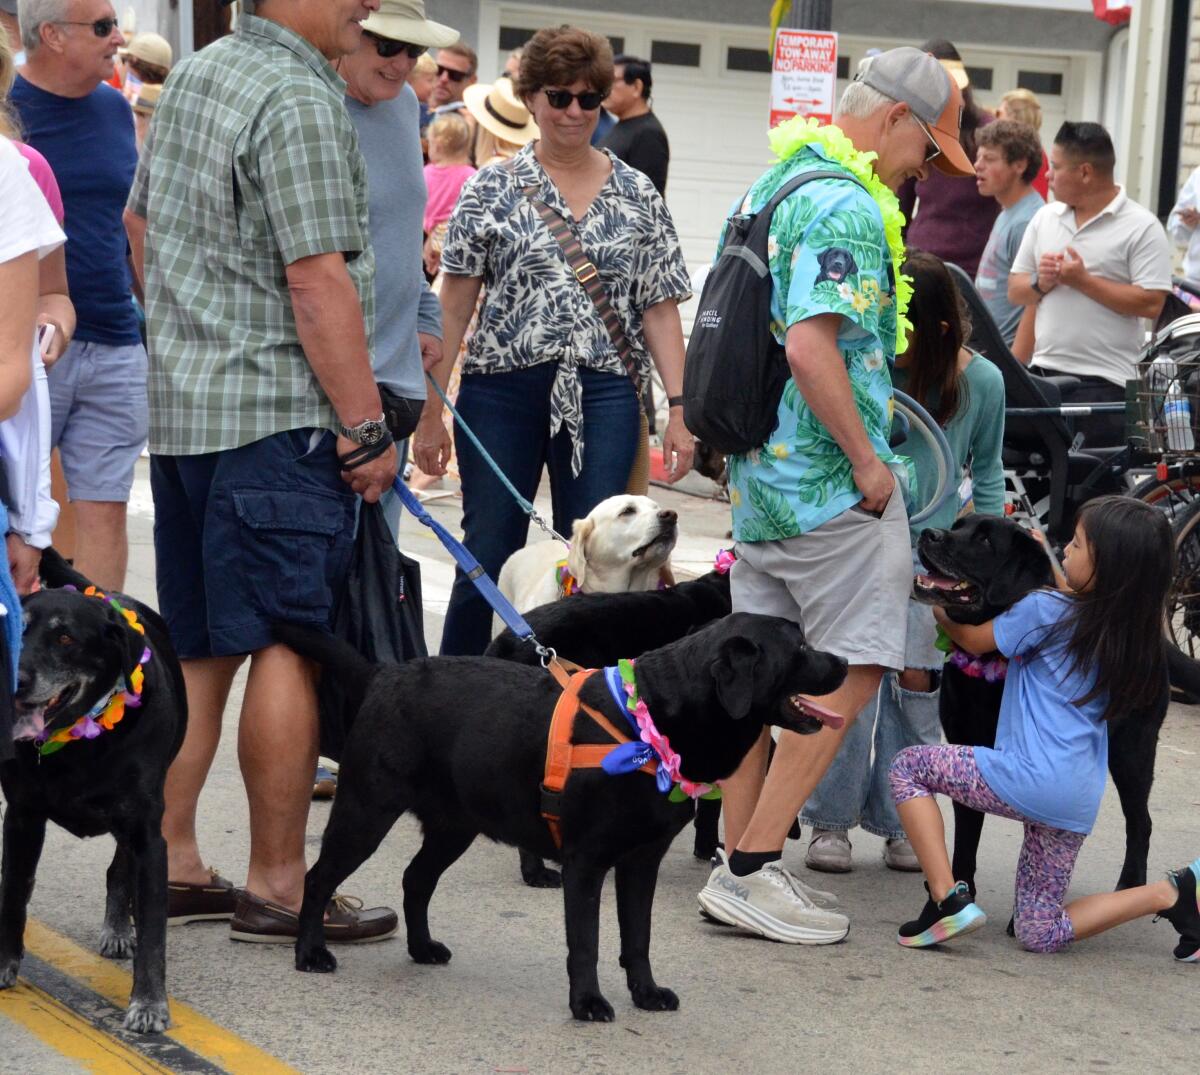 Assorted Labrador dogs receive hugs and pats from kids during the Balboa Island Parade.